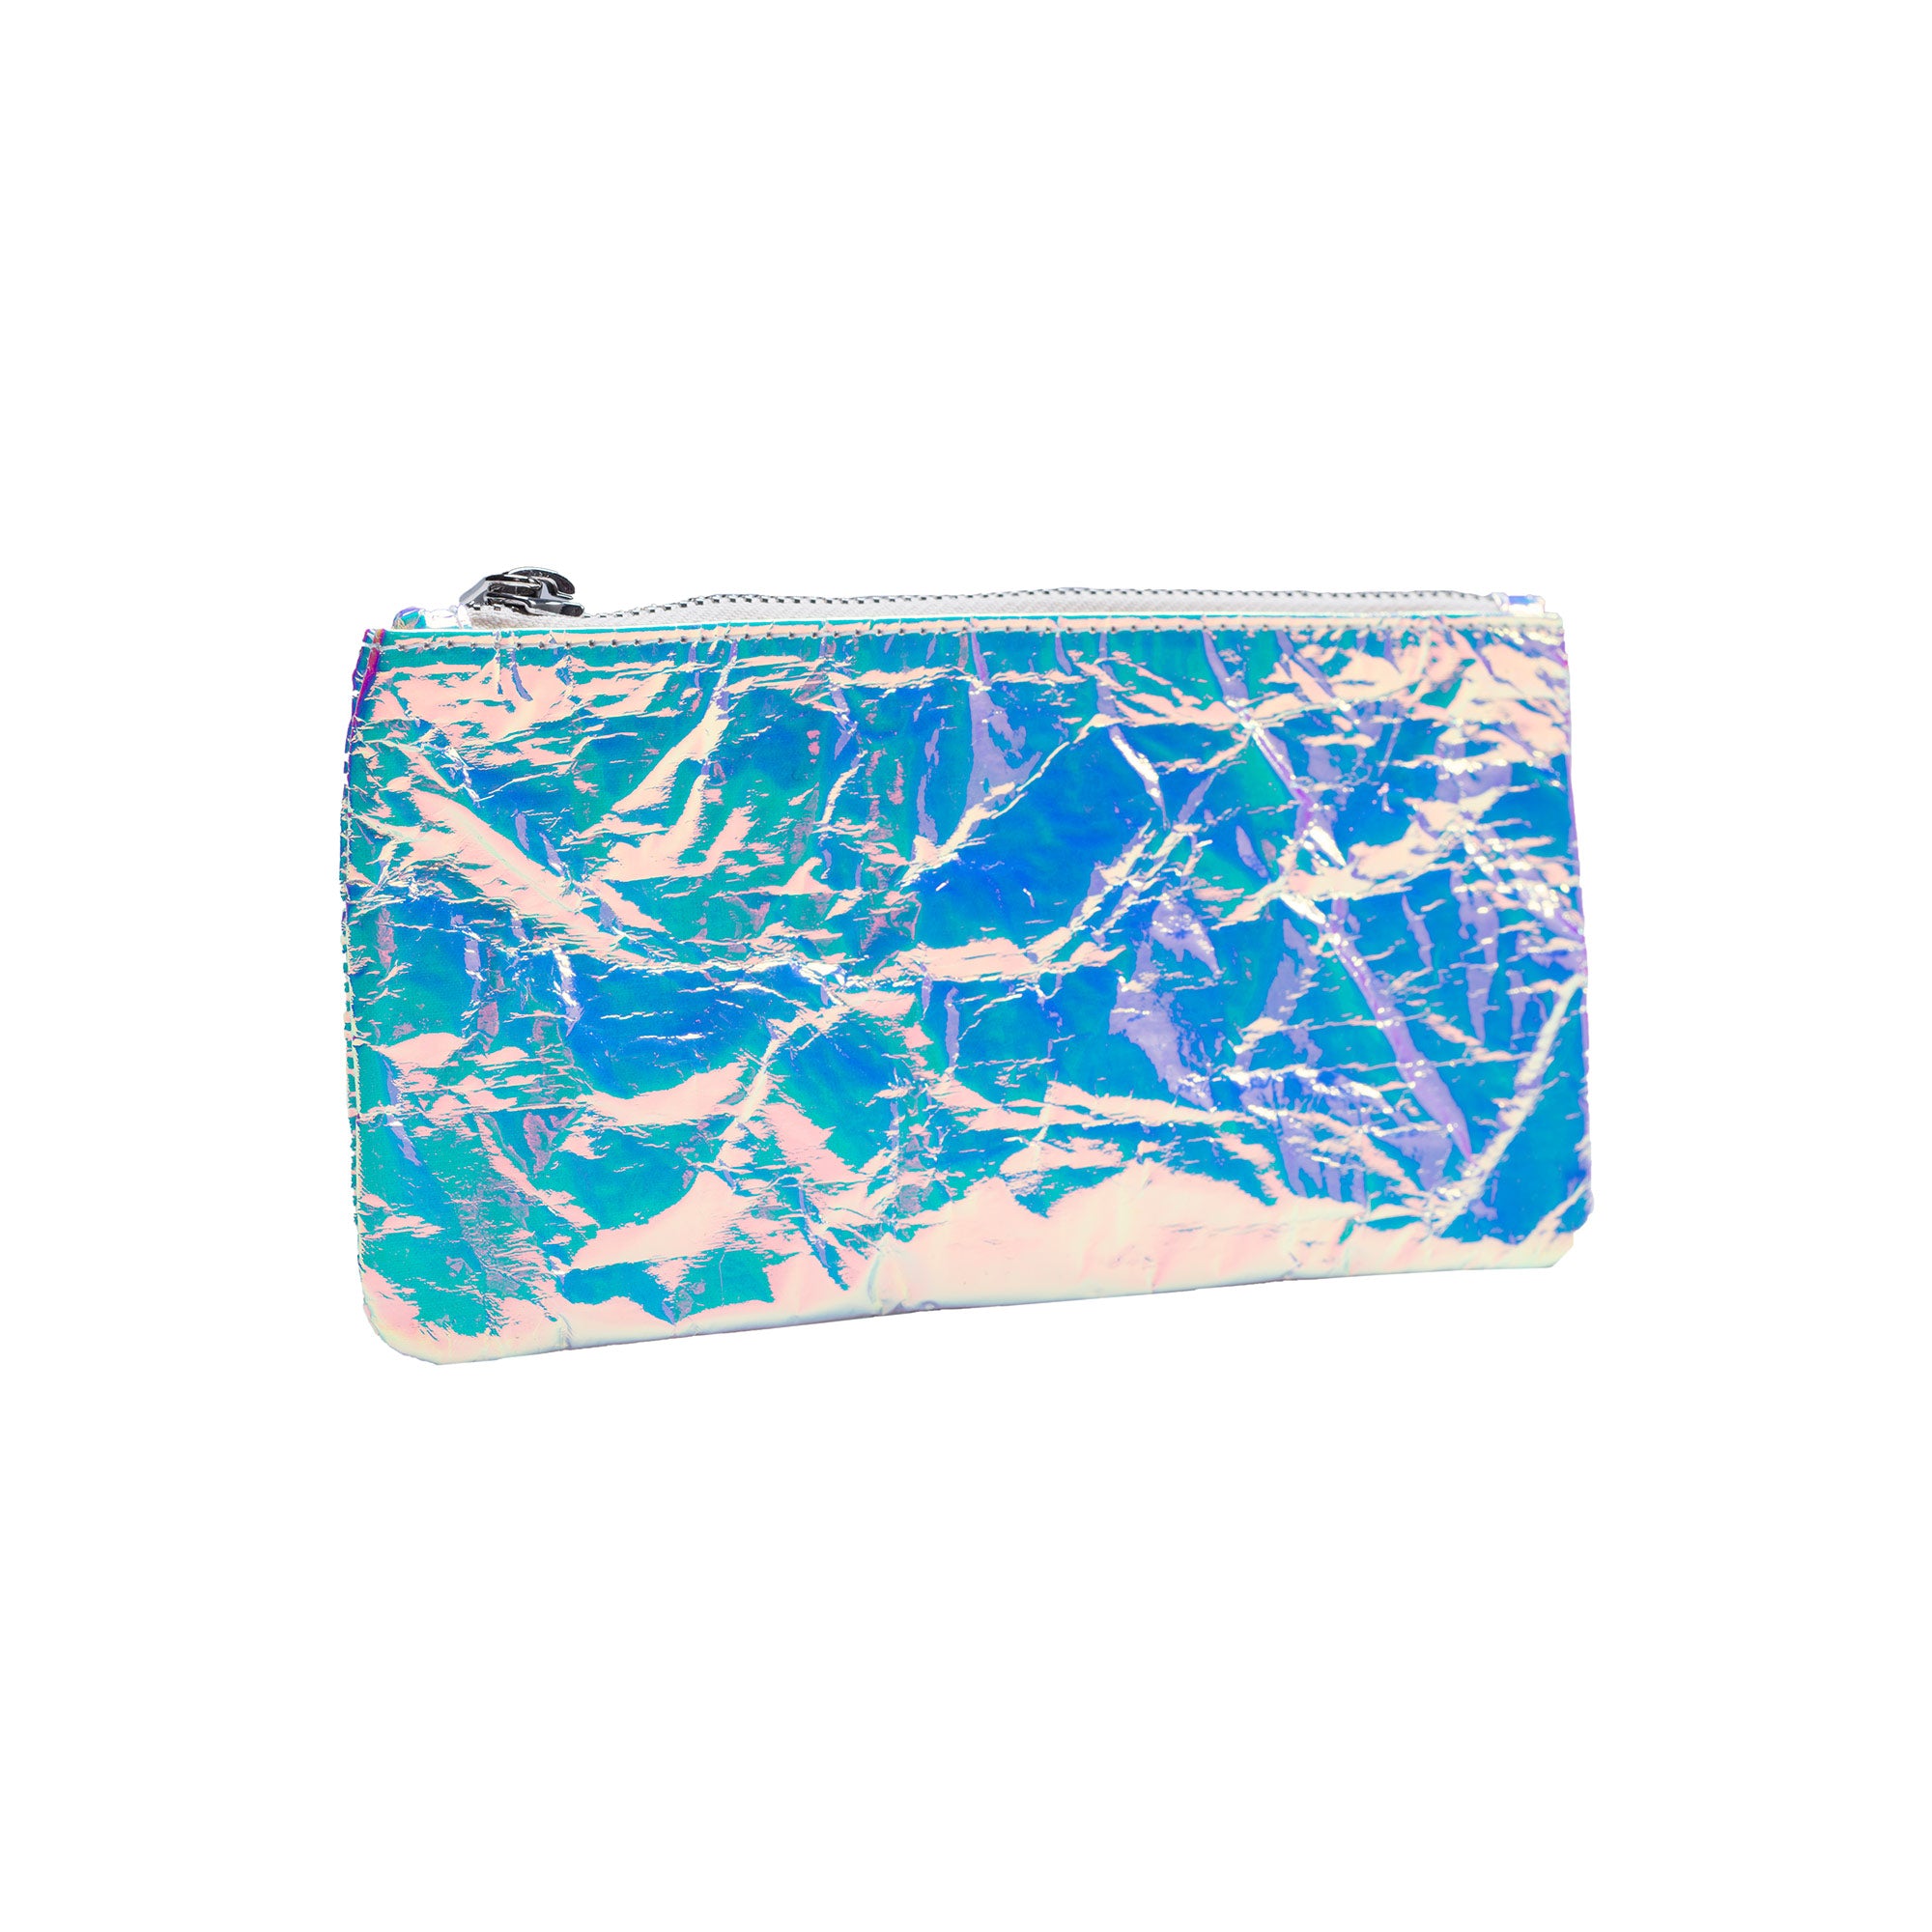 Iridescent Small Foil Pouch - Blue